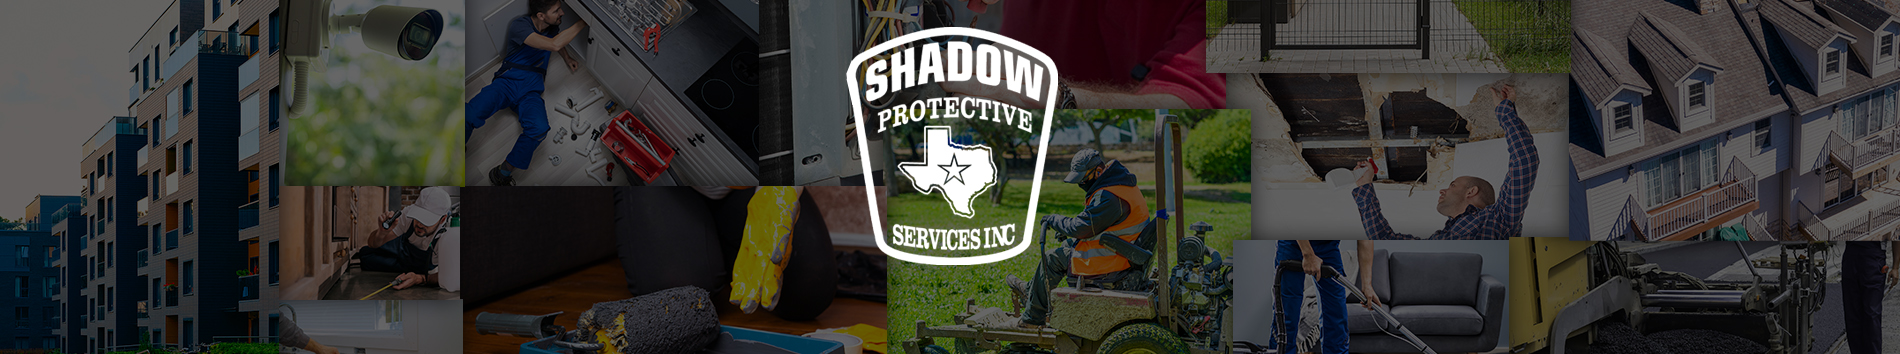 Shadow Protective Services Inc.